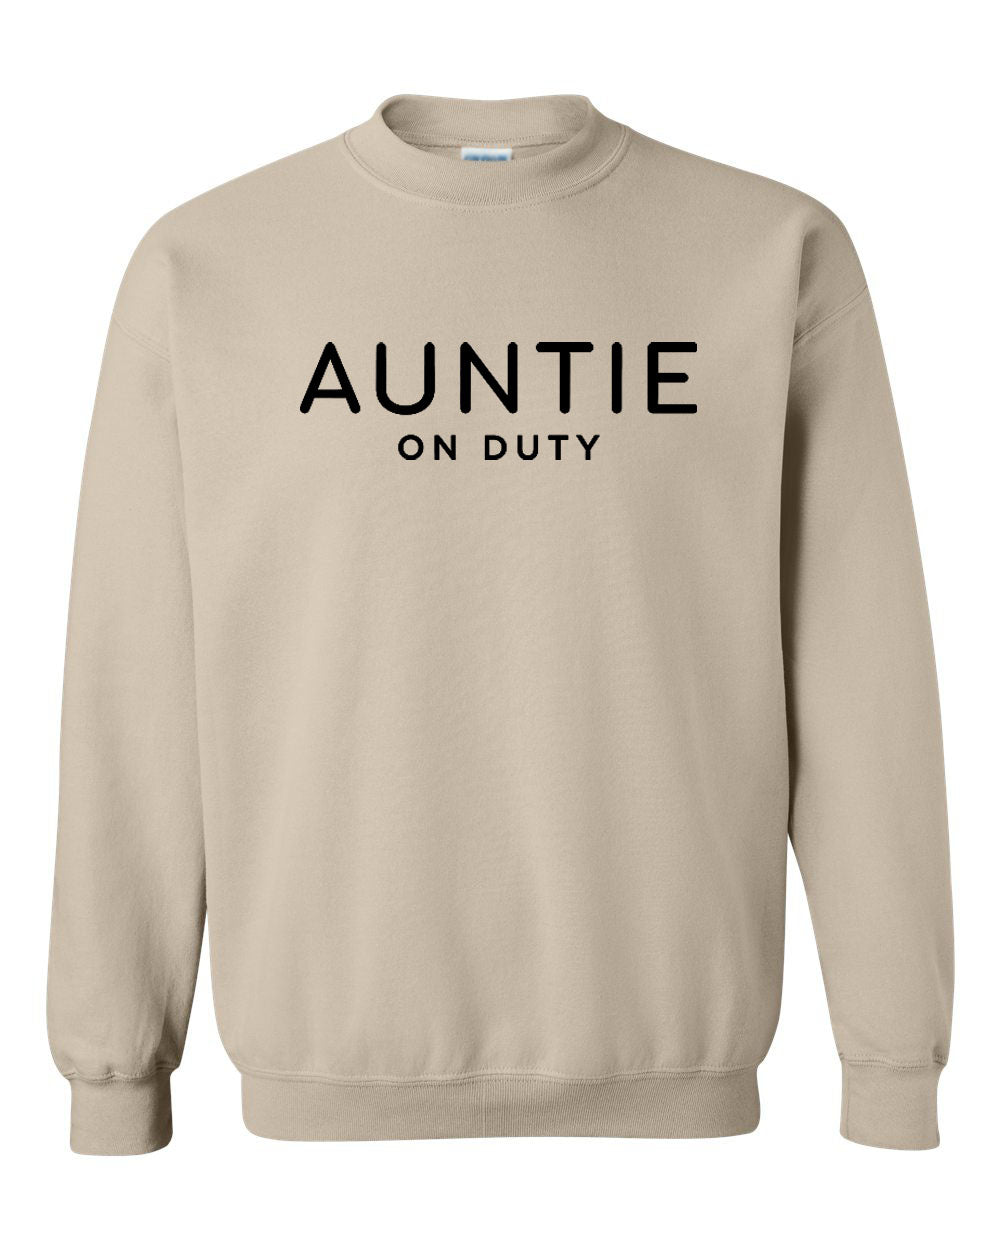 Auntie On Duty Soft Life Collection Sand Sweatshirt Hoodie